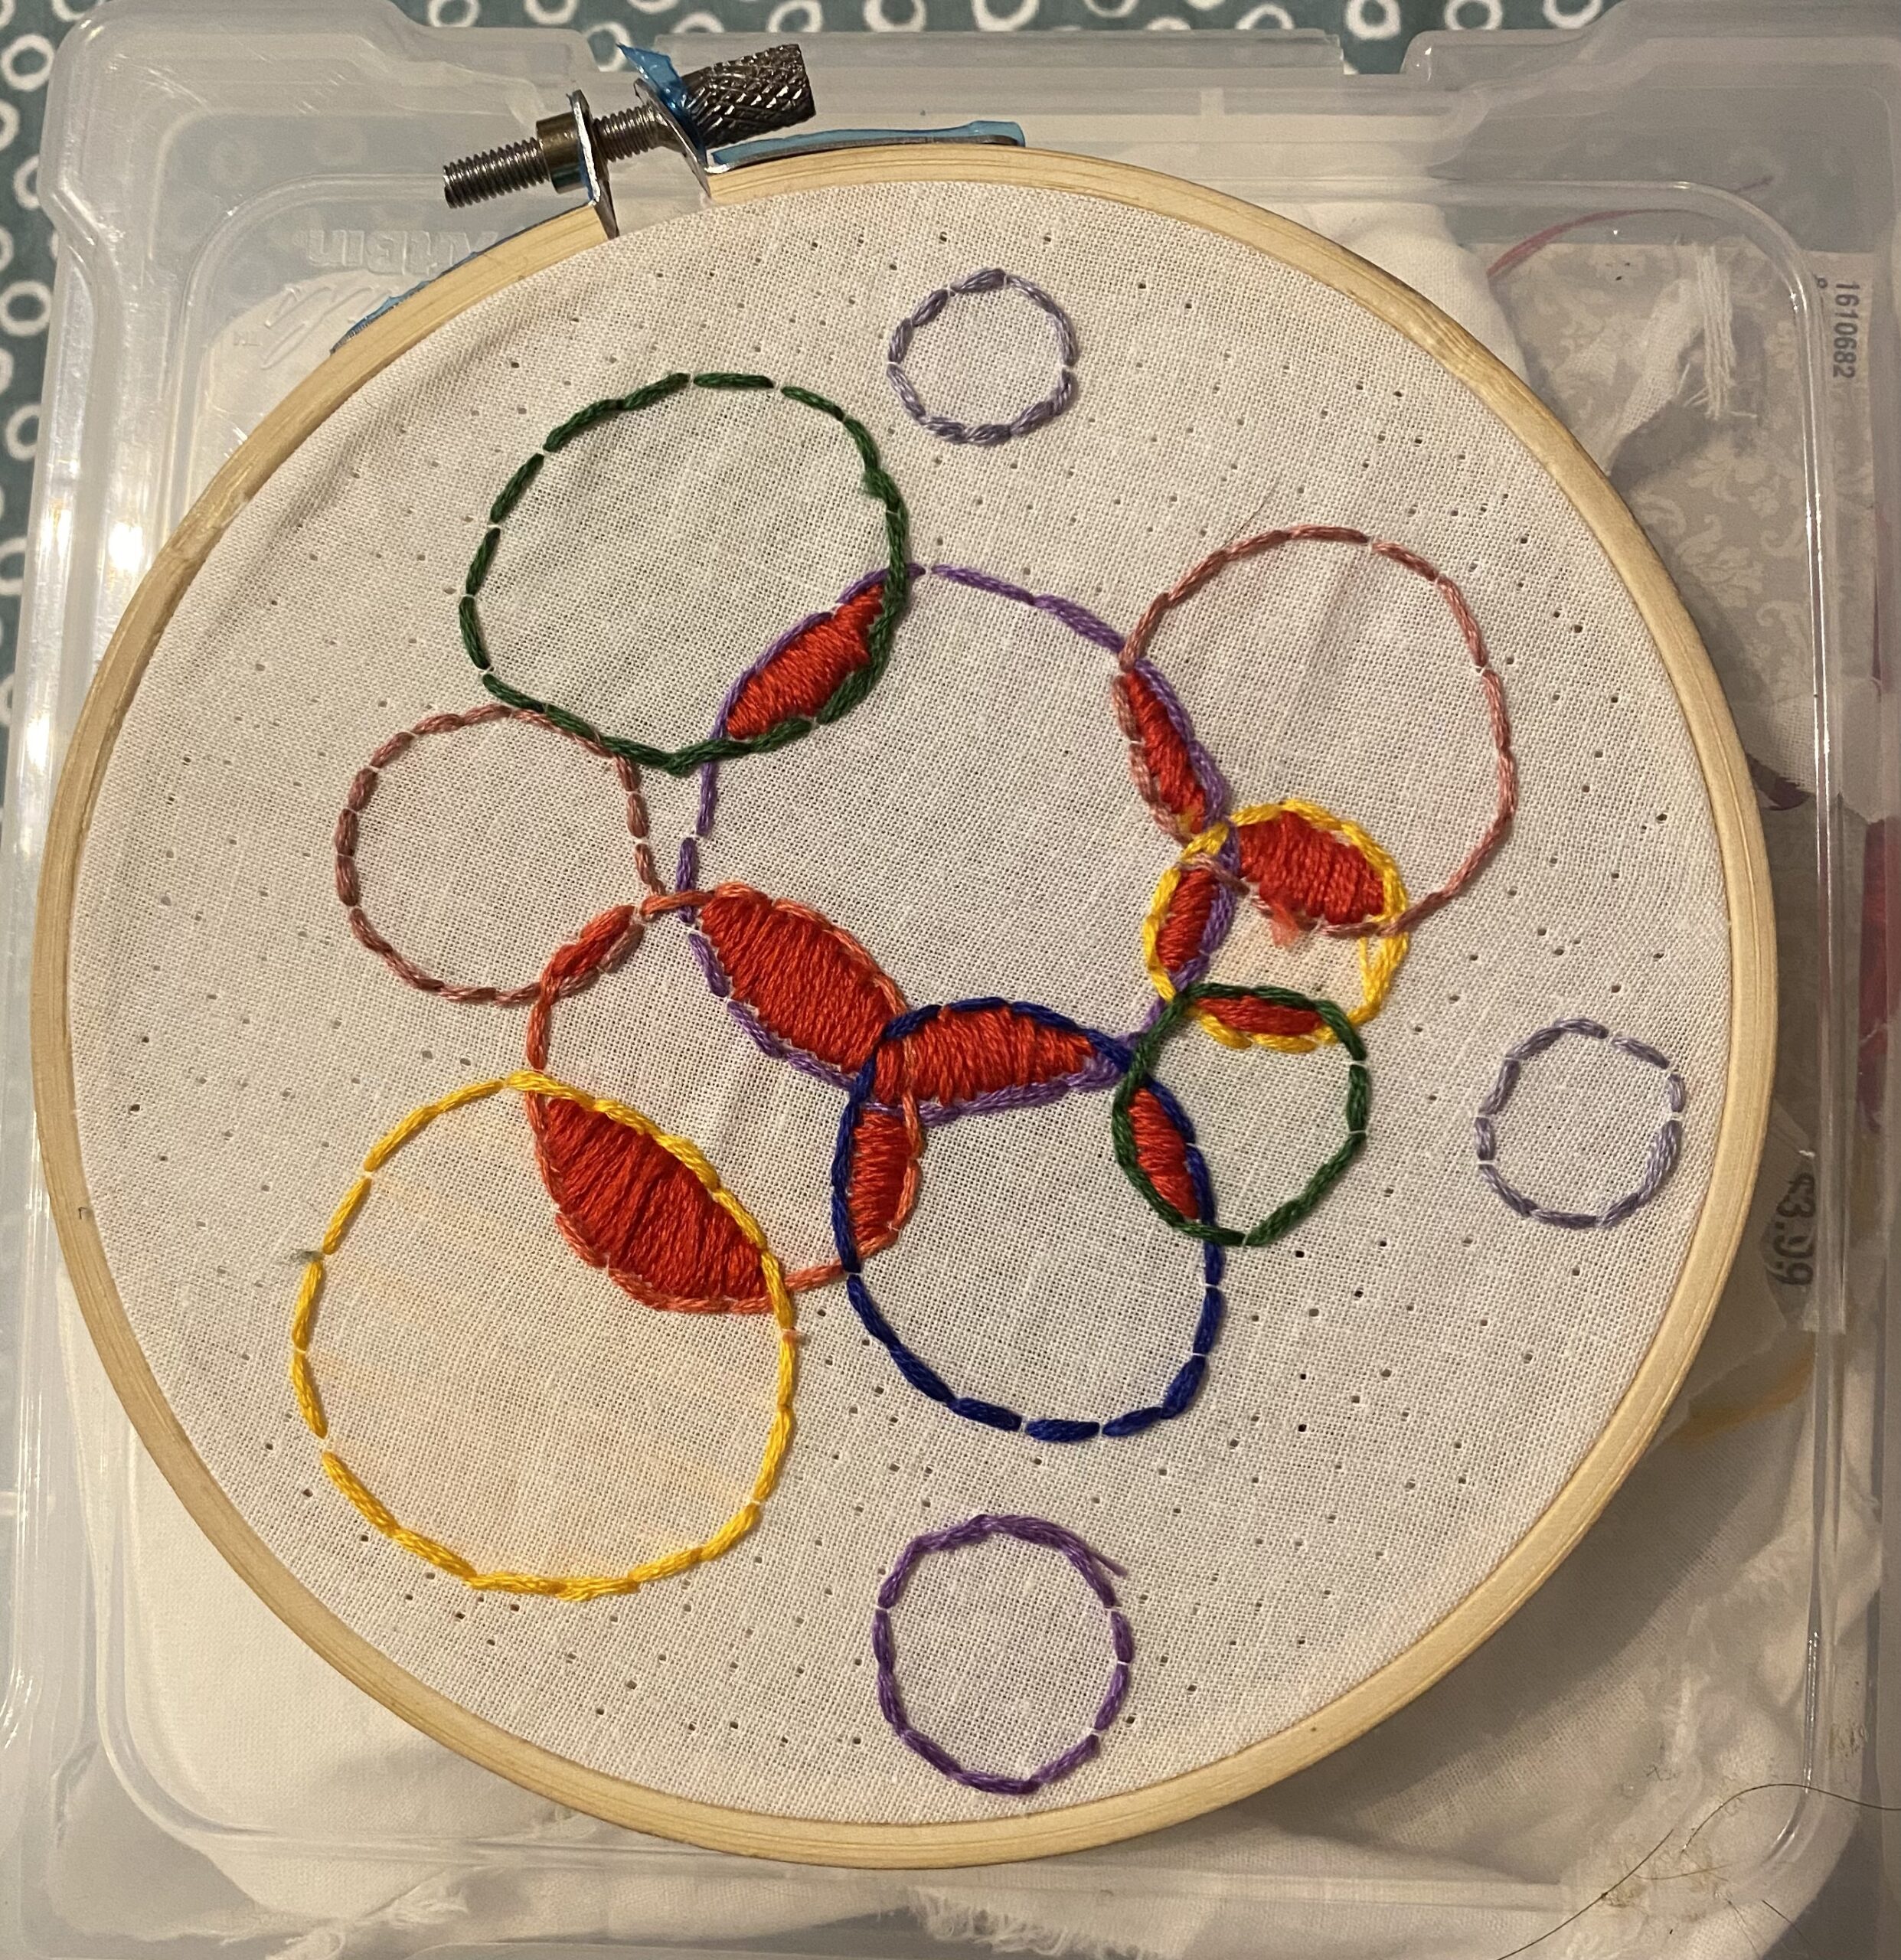 White fabric, dotted with tiny, deliberate holes poked through it is held in an embroidery hoop. In red, blue, purple, yellow, and green embroidery floss are several circles backstitched in different colors. Where the circles meet and overlap, the area is filled with red embroidery floss in a satin stitch pattern.